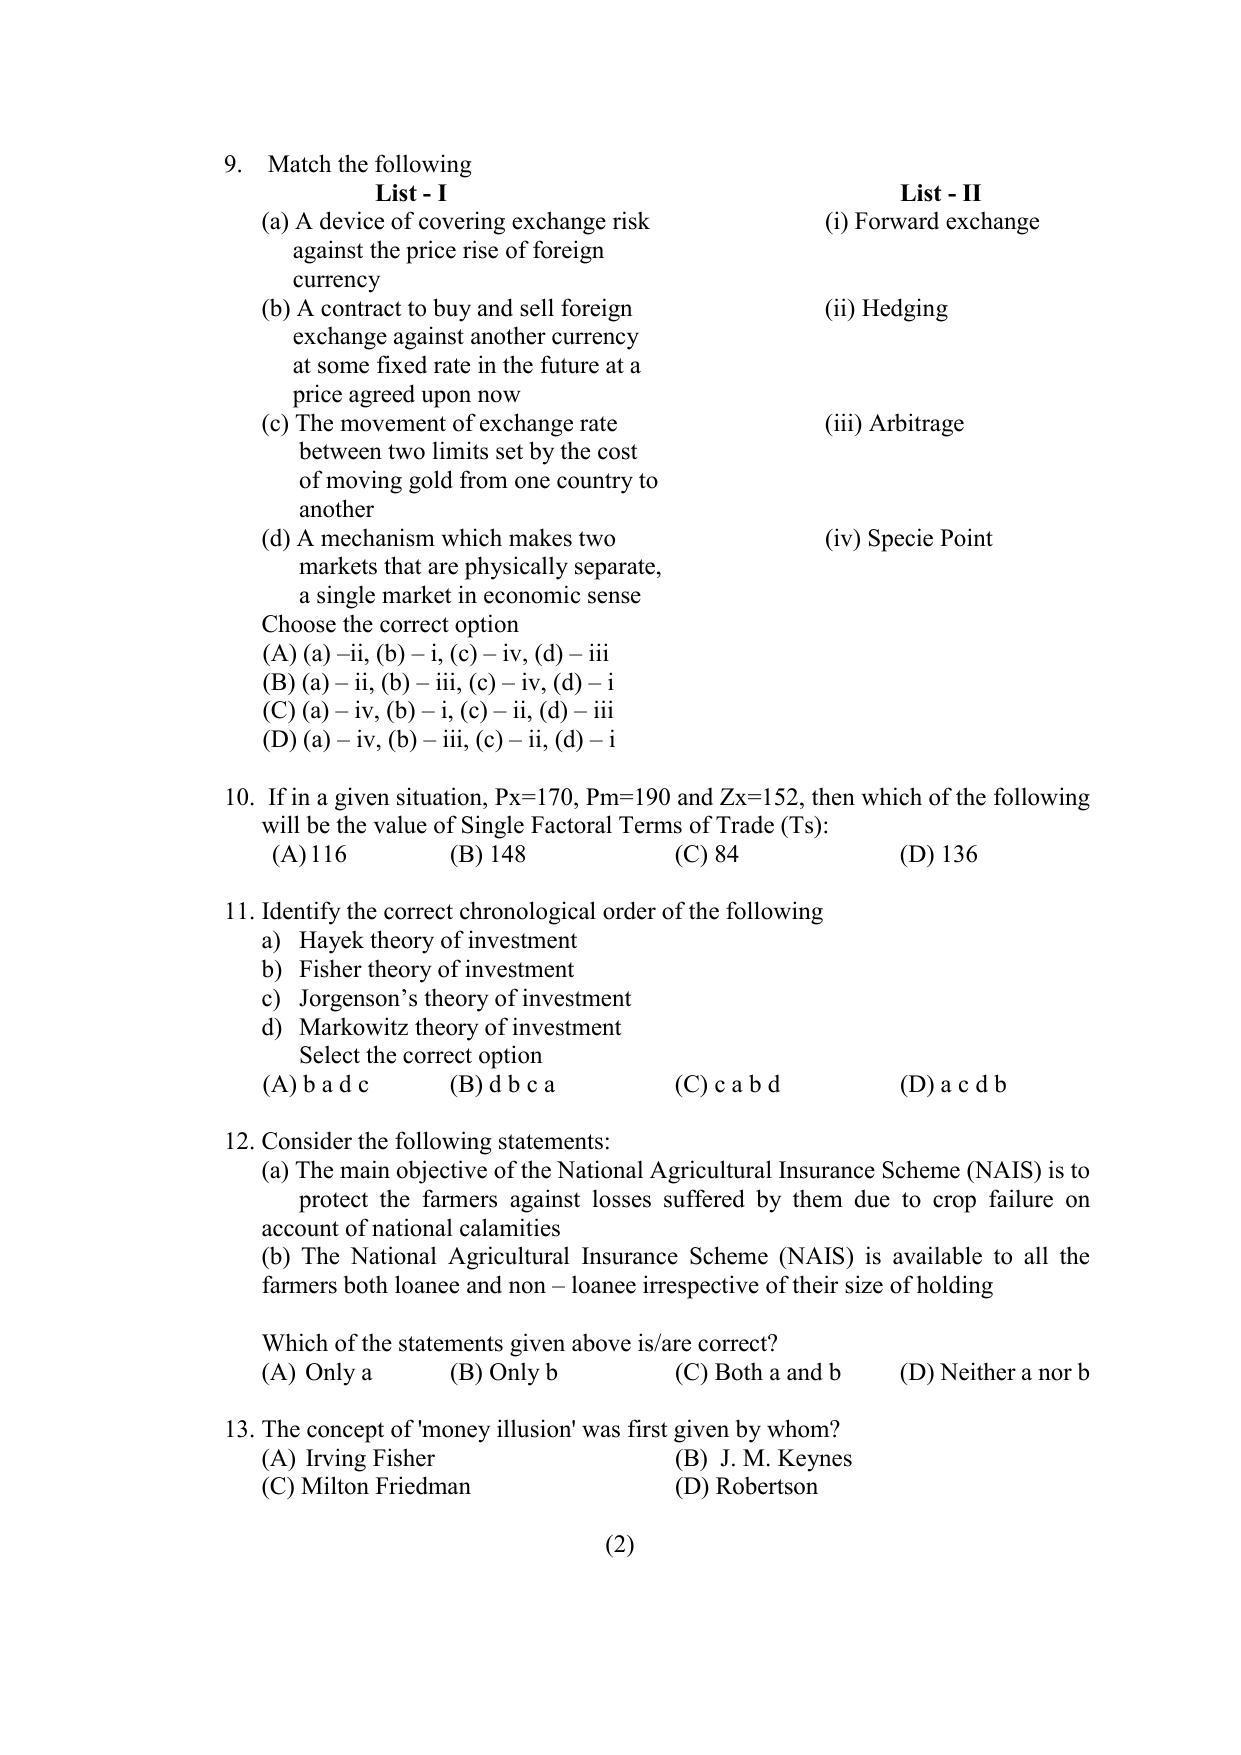 PU MPET Ancient Indian History & Archeology 2022 Question Papers - Page 7